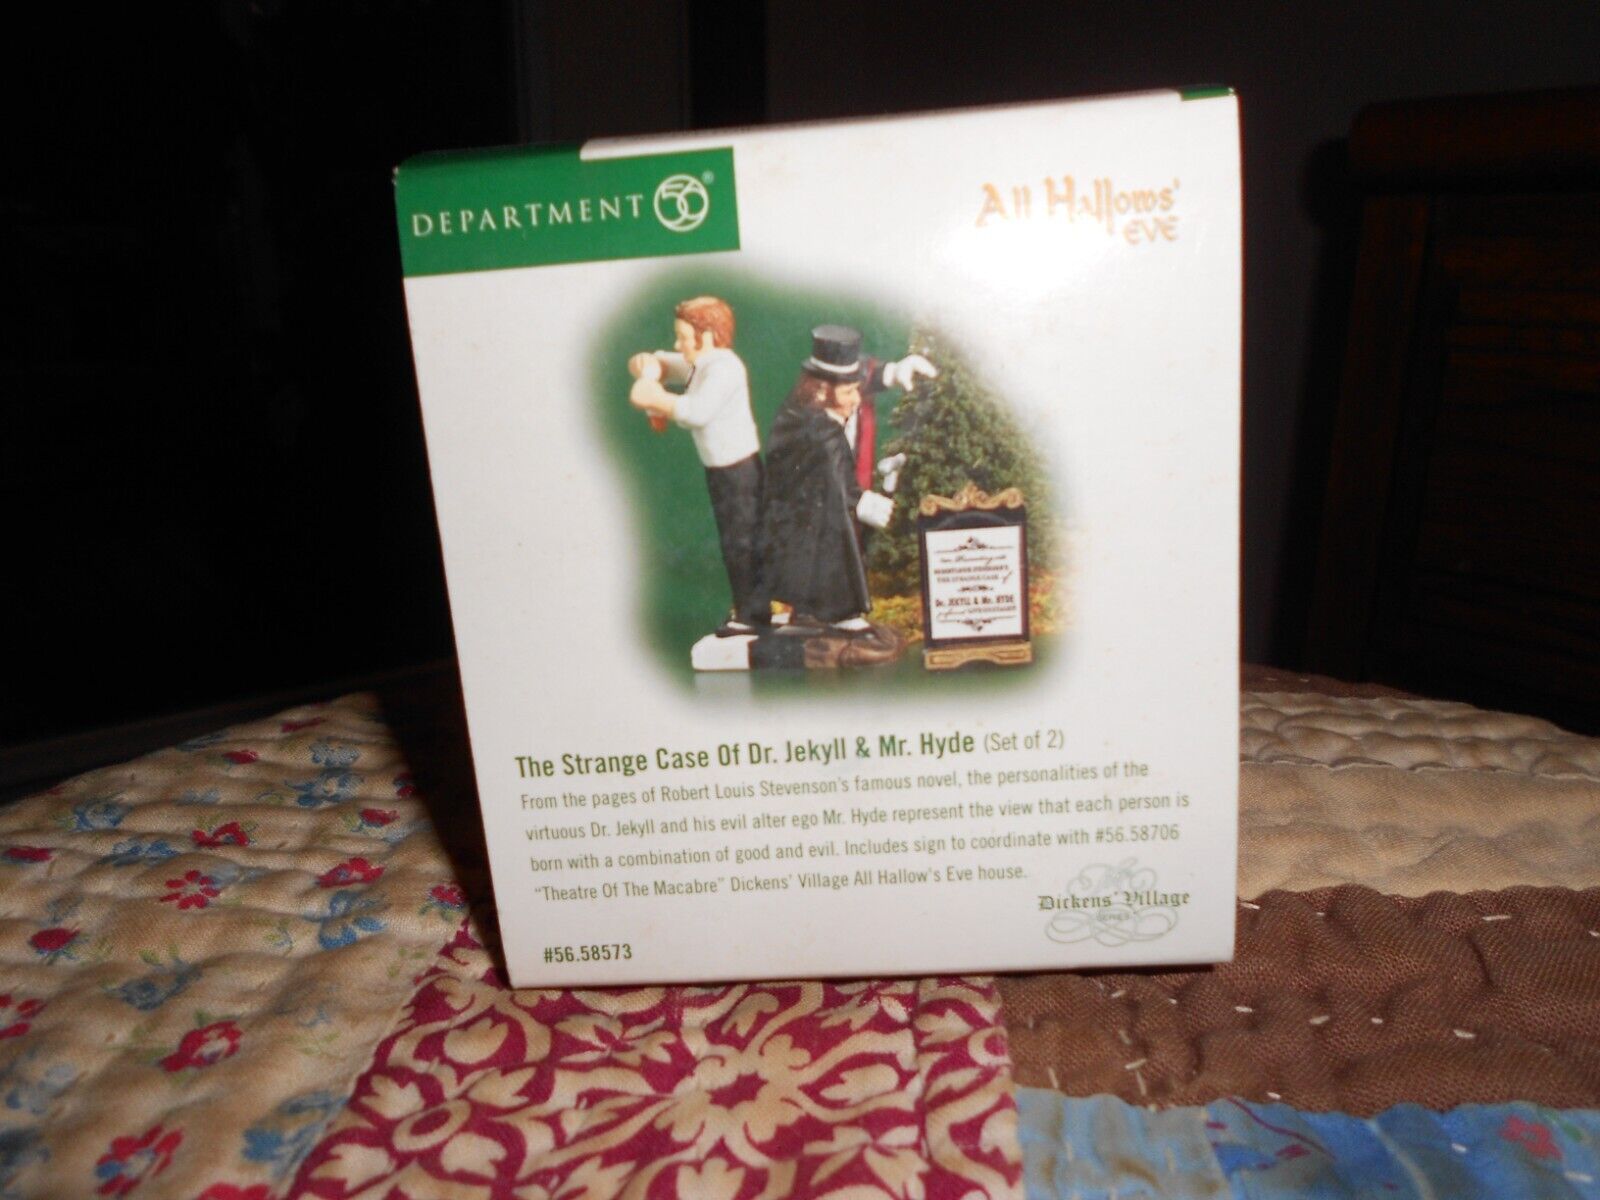 DEPT 56 DICKENS' All Hallows Eve THE STRANGE CASE OF DR. JEKYLL & MR. HYDE  NIB